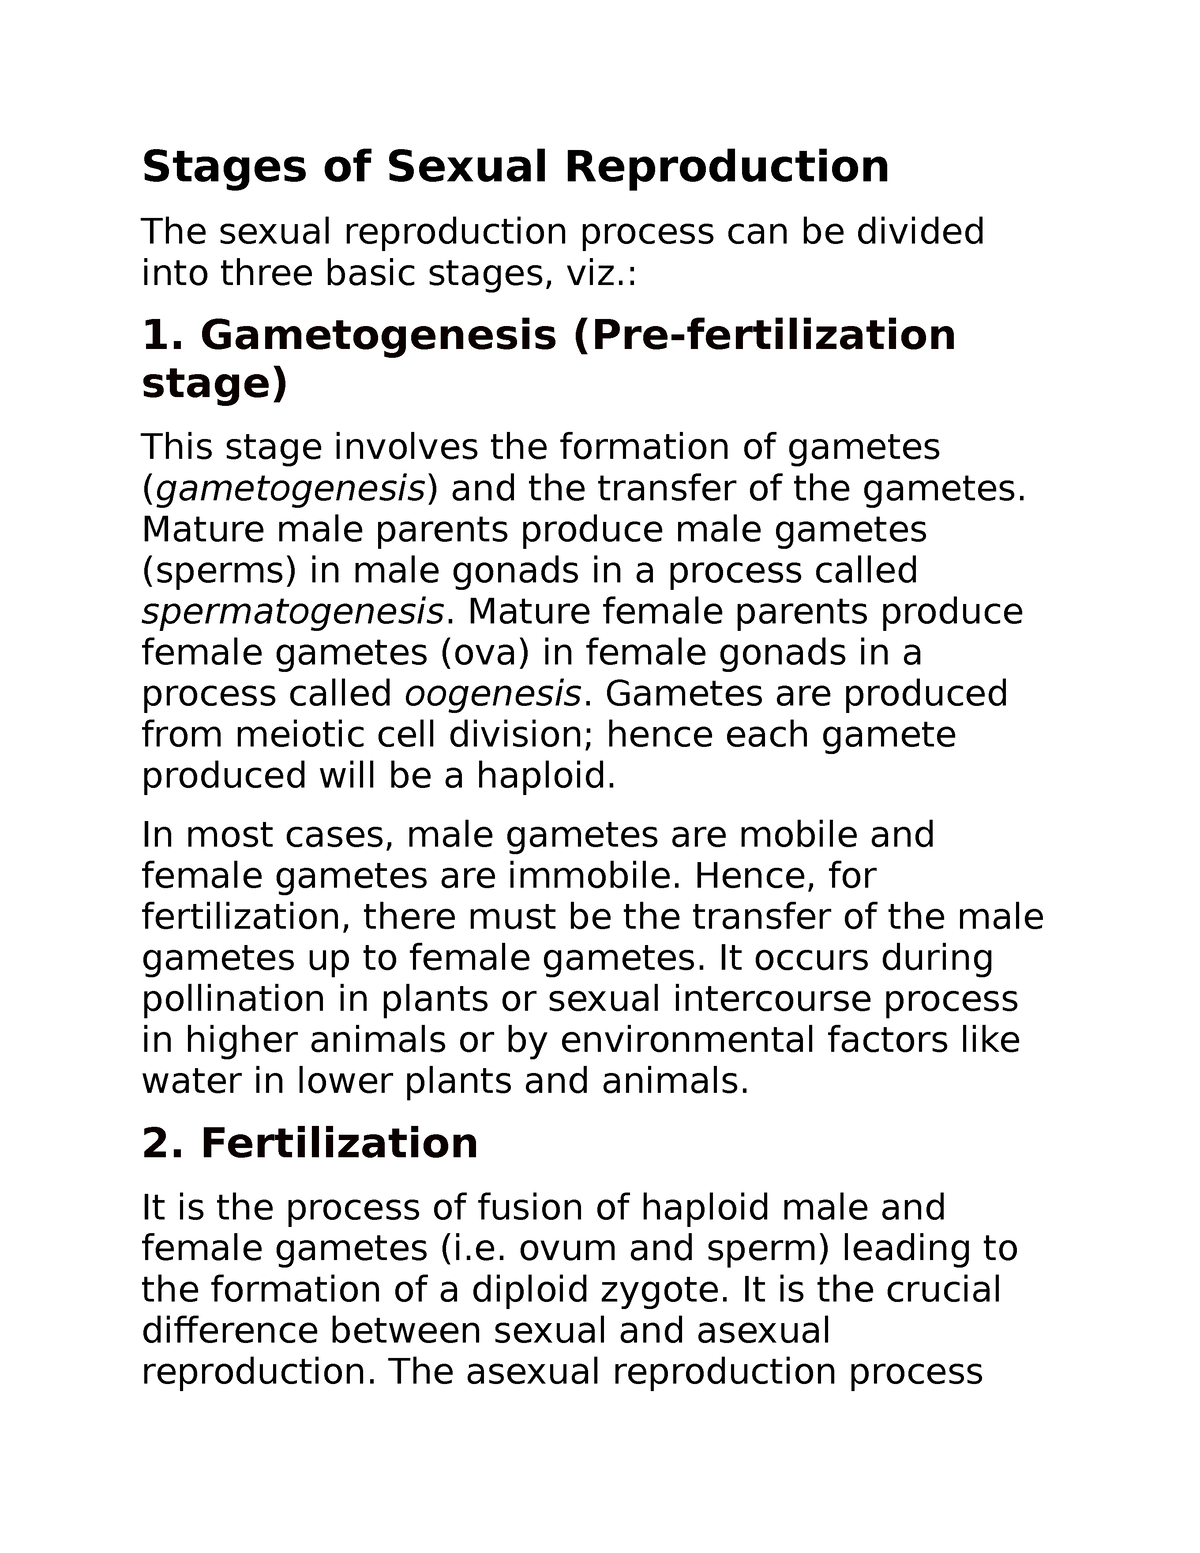 Bio 2 Notes Stages Of Sexual Reproduction The Sexual Reproduction Process Can Be Divided 3883